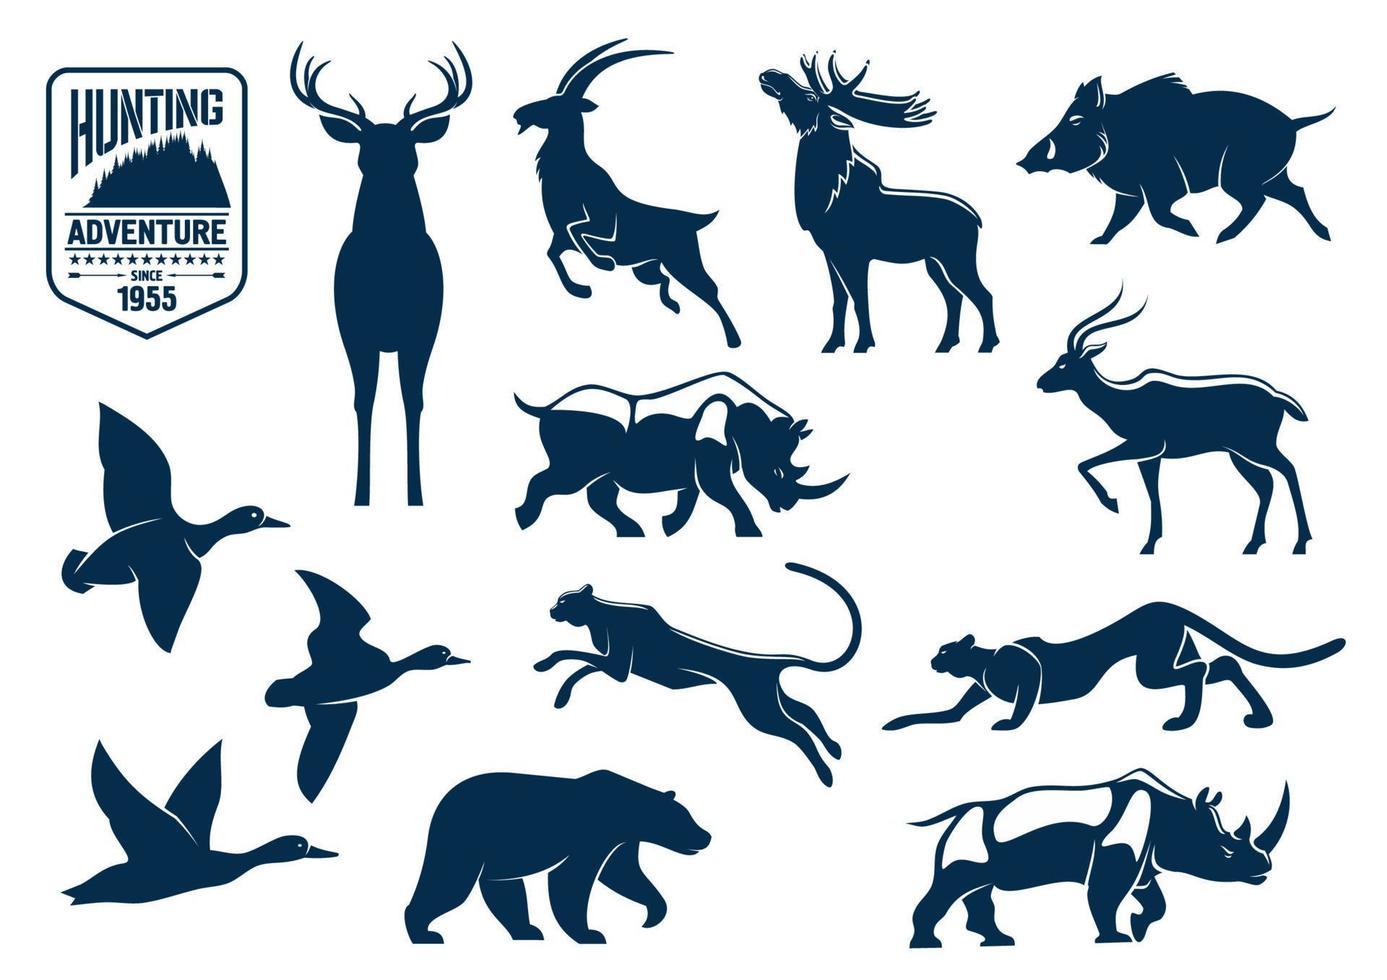 Savanna and forest animals for hunting icons vector